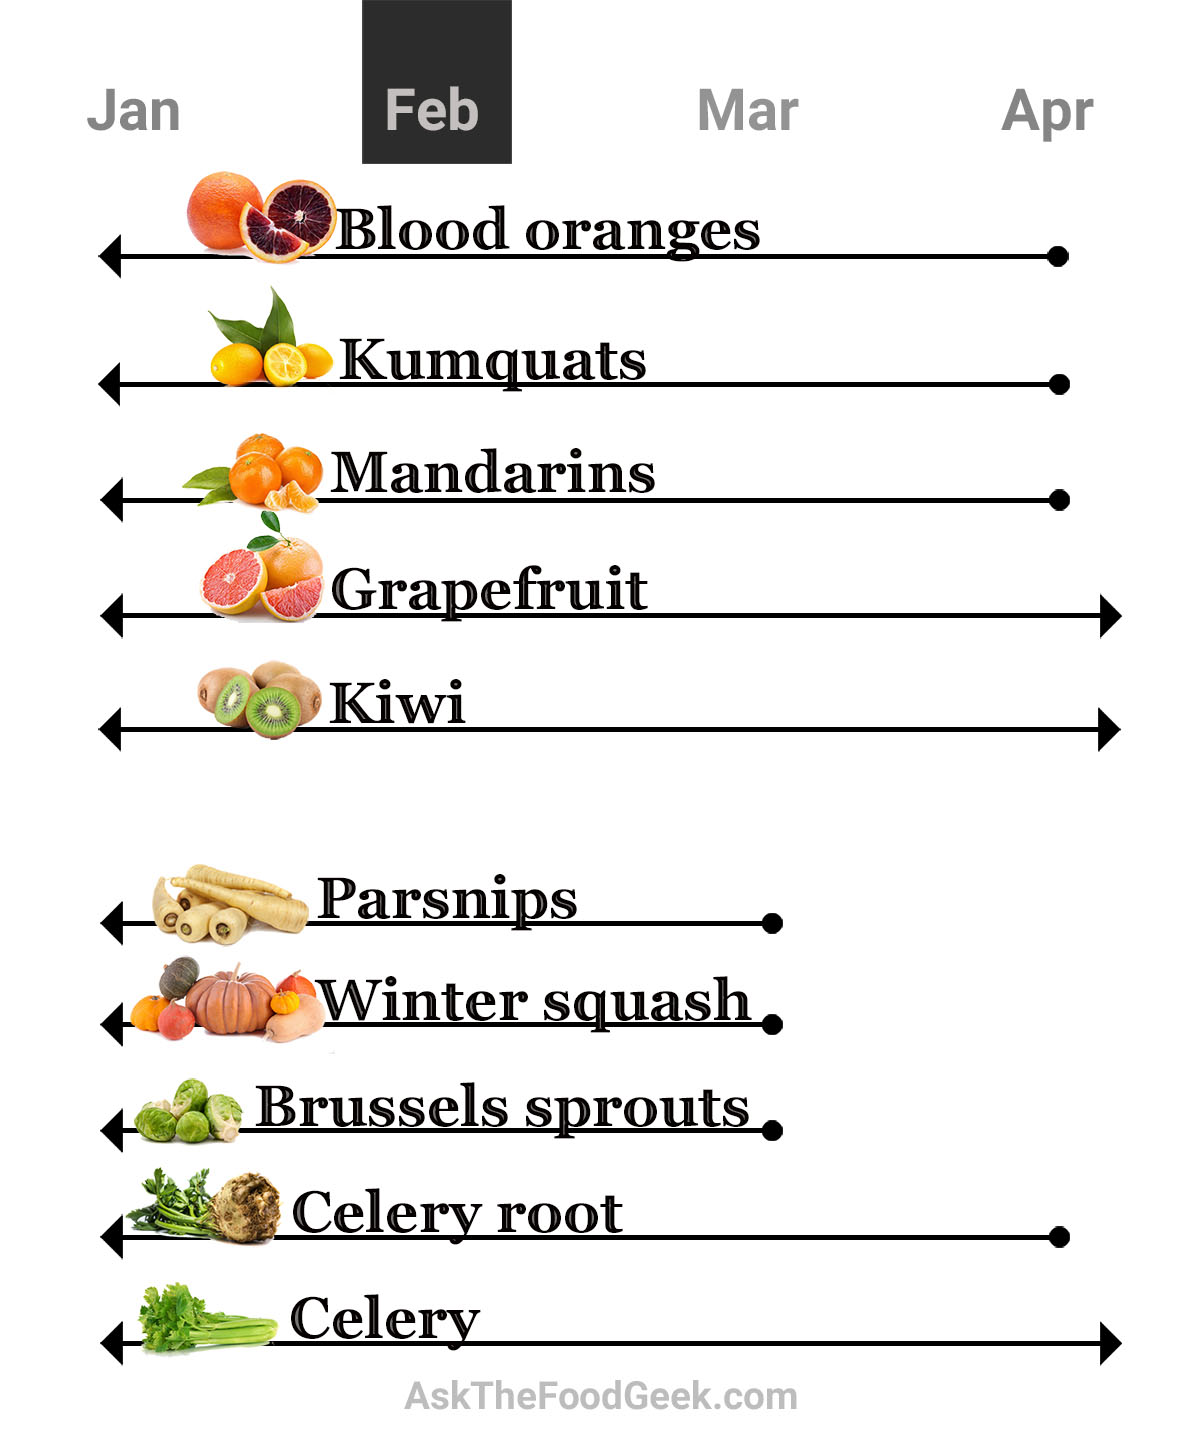 Season chart for February fruits and vegetables: blood oranges, kumquats, mandarins, grapefruit and other citrus. Parsnips, winter squash, brussels sprouts, celeriac, and celery.